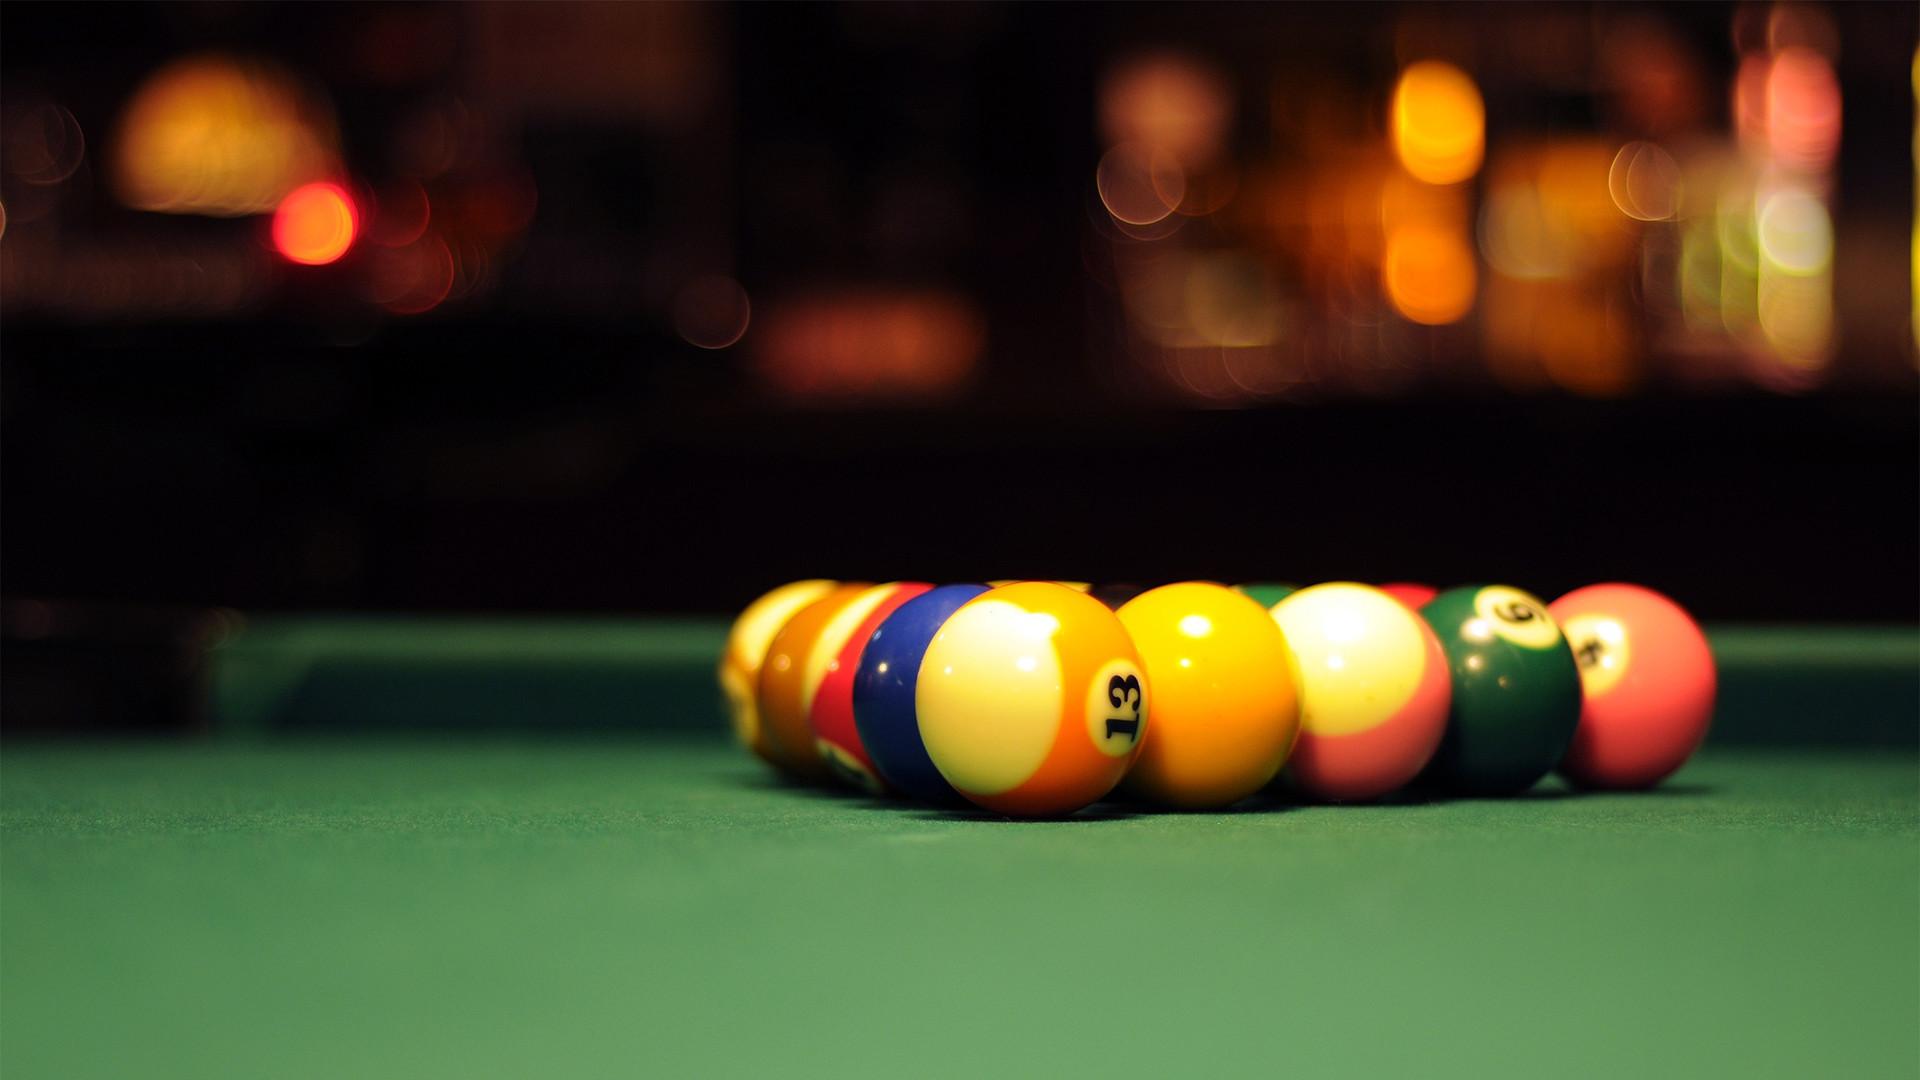 1920x1080 Melbourne Function Venue Pool: History of Billiards or Pool